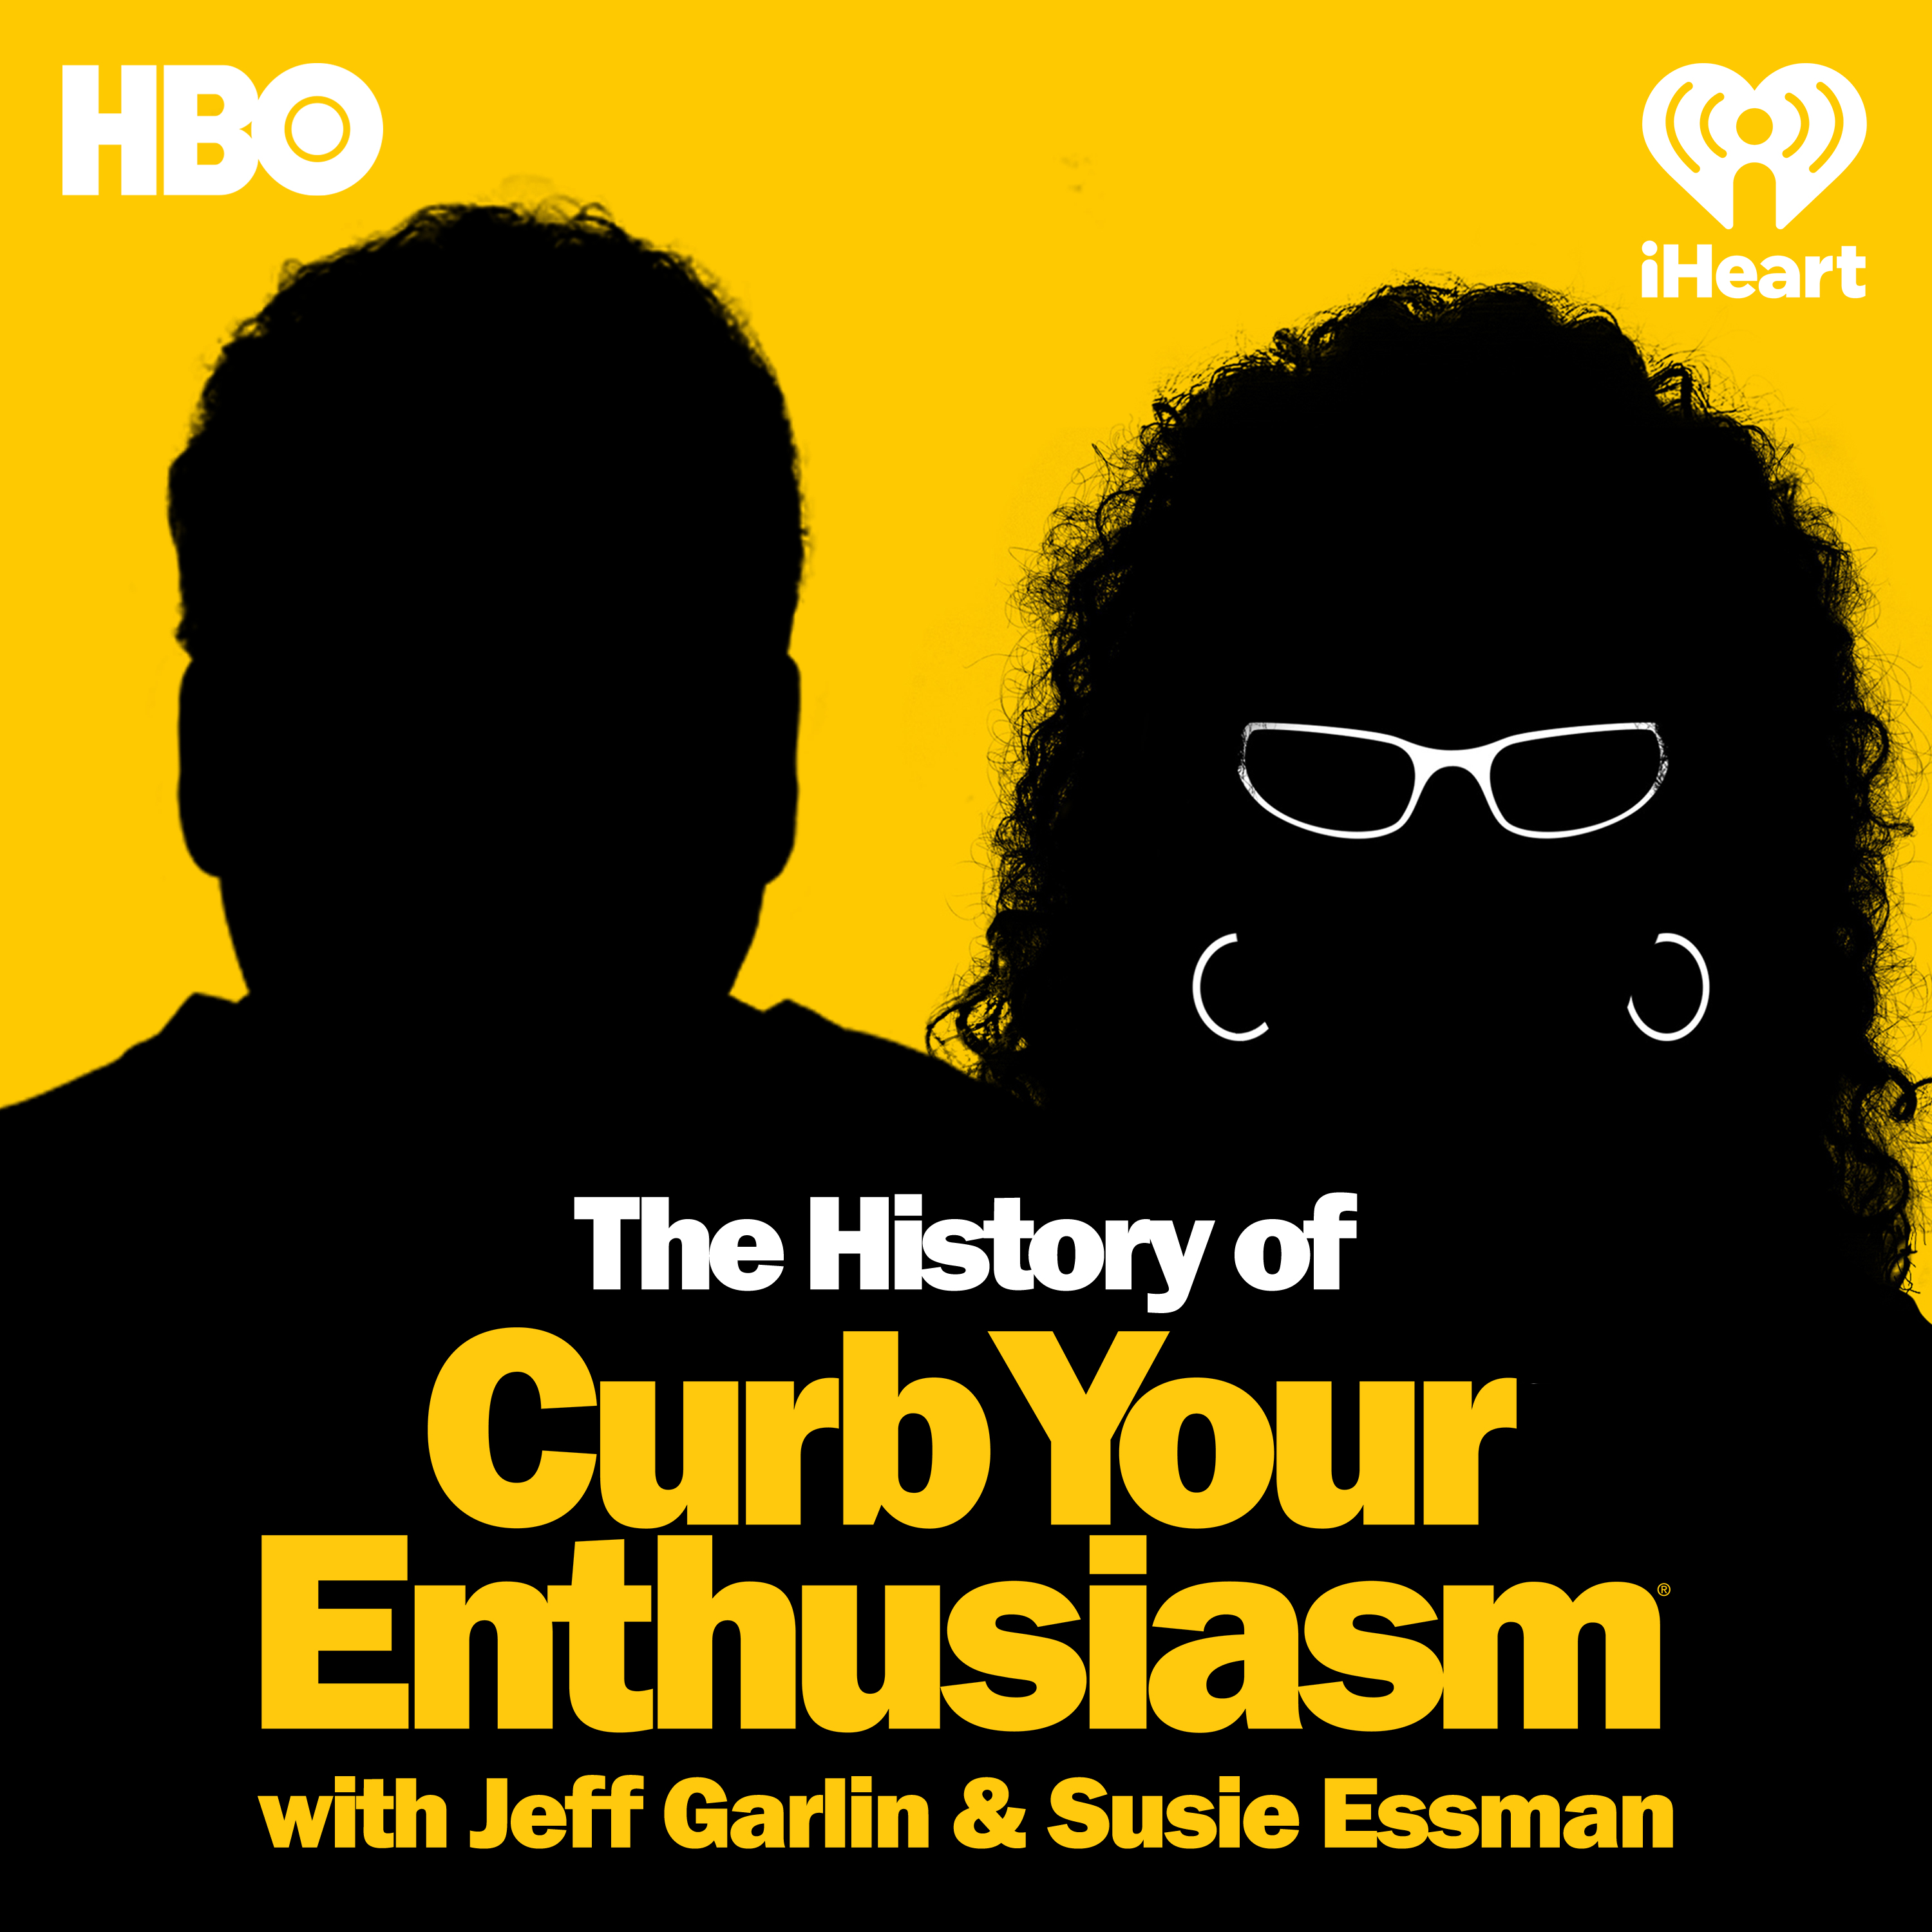 The History Of Curb Your Enthusiasm With Jeff Garlin & Susie Essman podcast show image